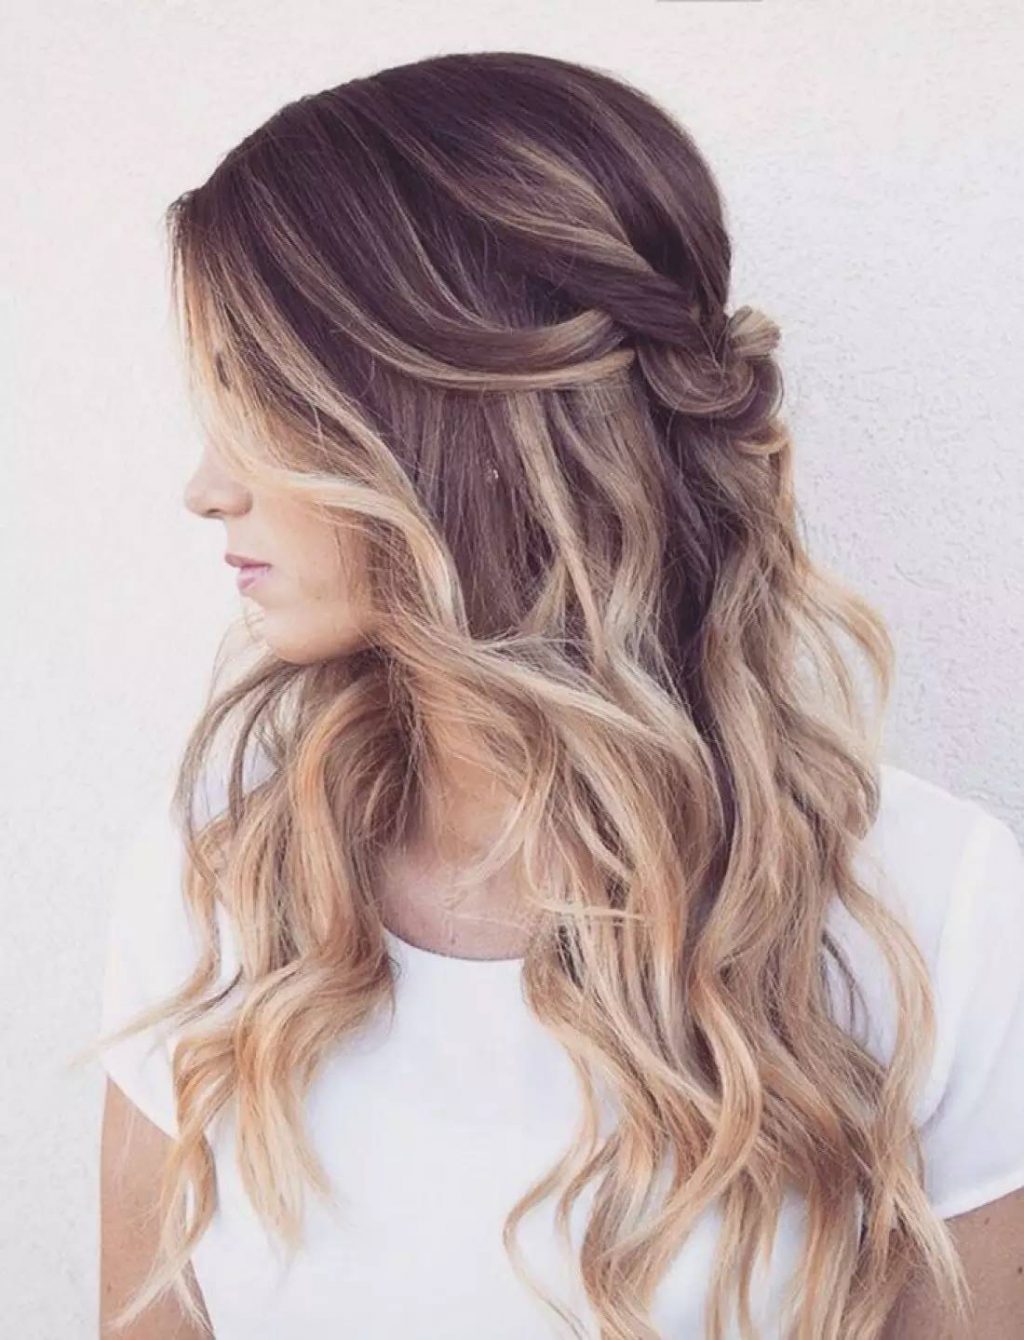 10 Easy Hairstyles for Autumn - Wonder Forest